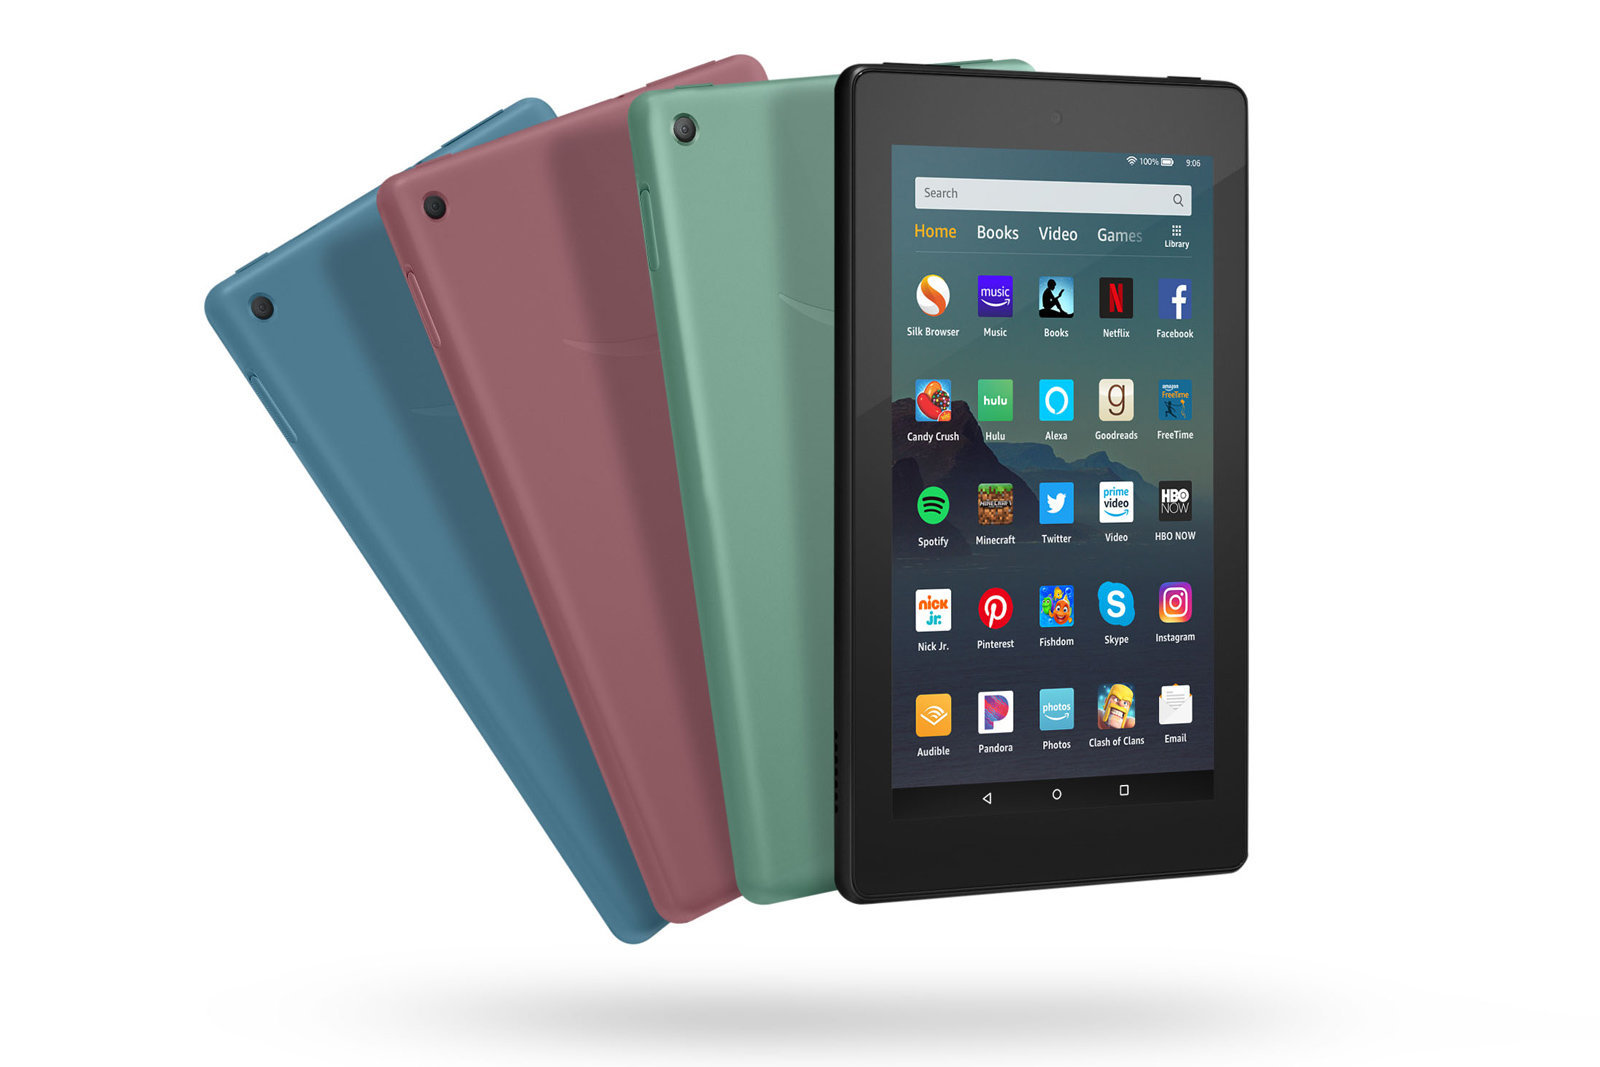 EXPIRED: Amazon’s Fire Tablets Are on Sale Starting at Just $29.99 For Black Friday